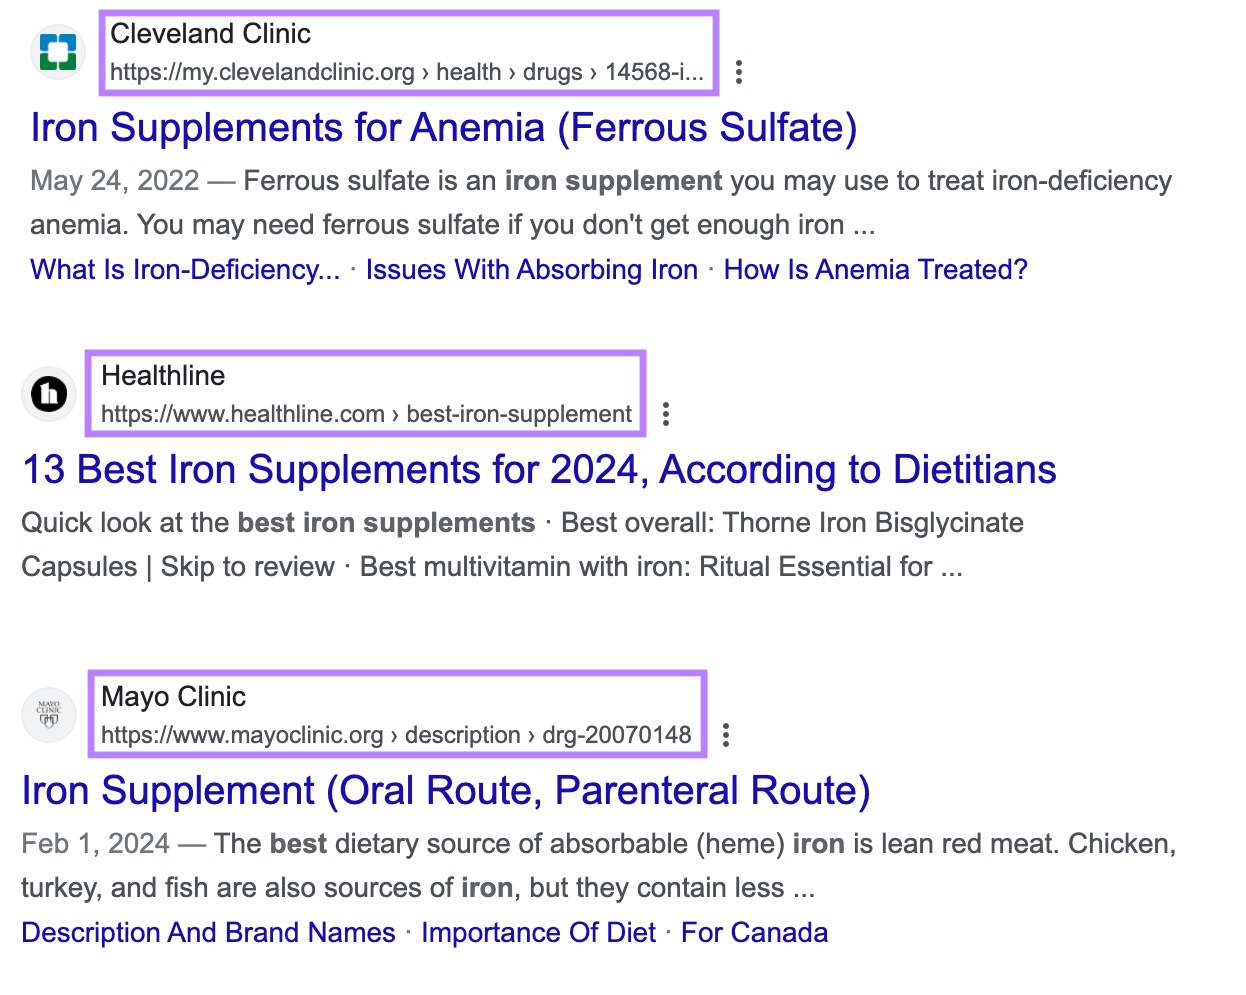 Top-ranking results for "best iron supplement" are informational pages from well-established health websites